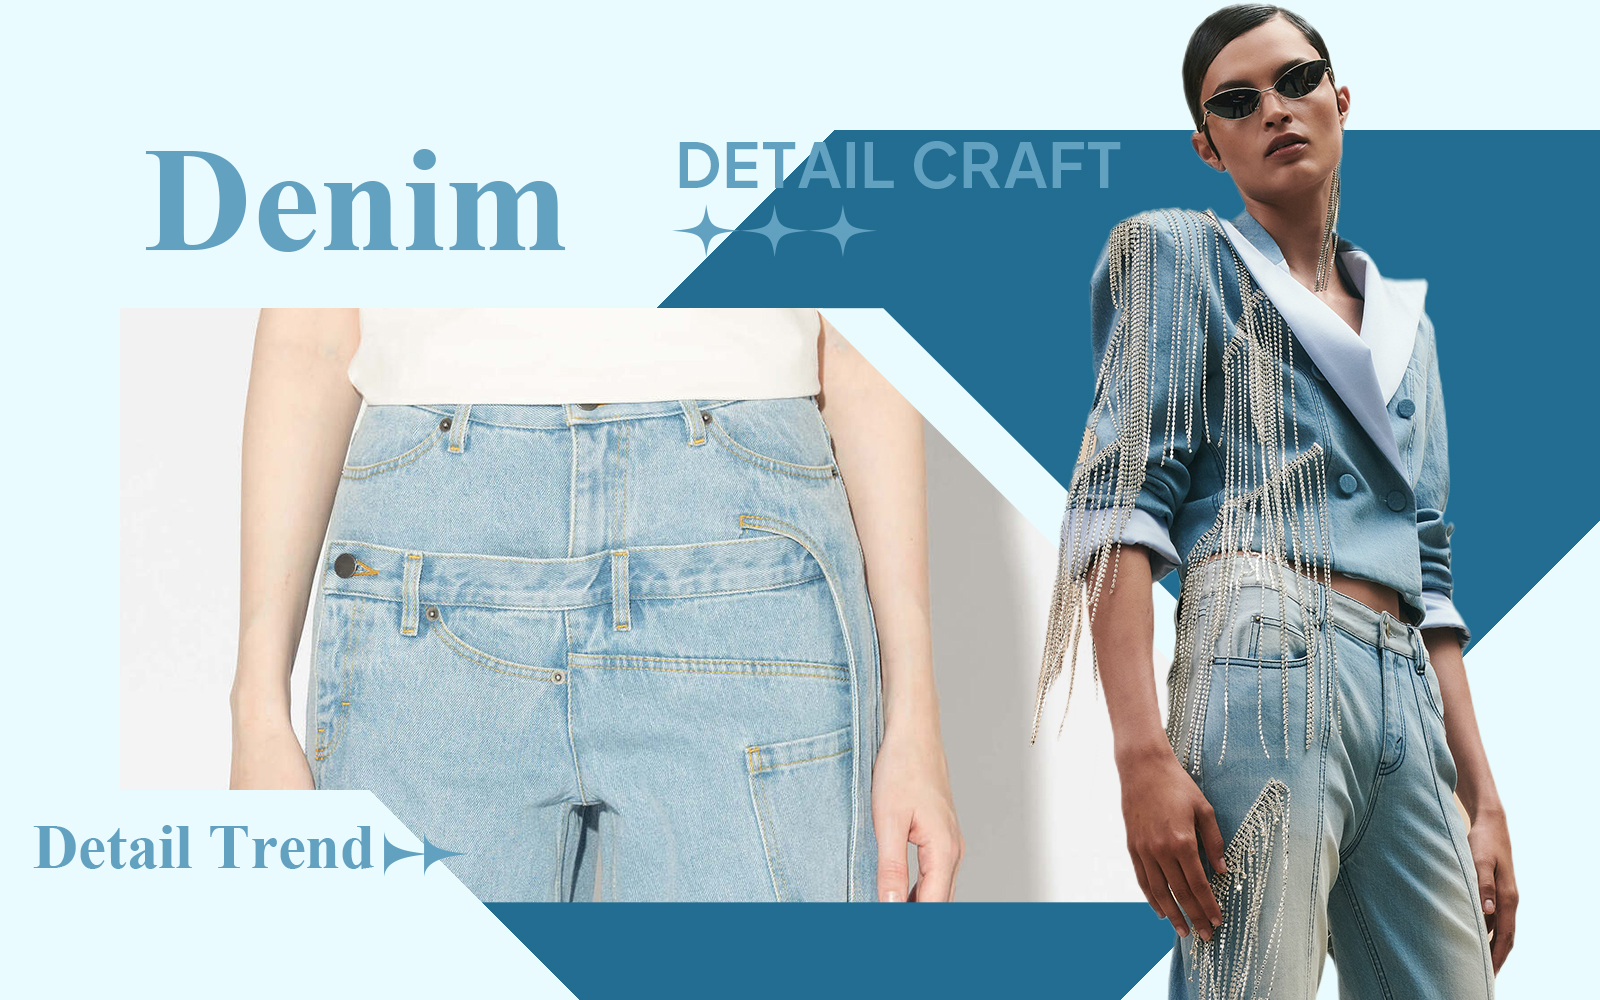 The Detail & Craft Trend for Denim